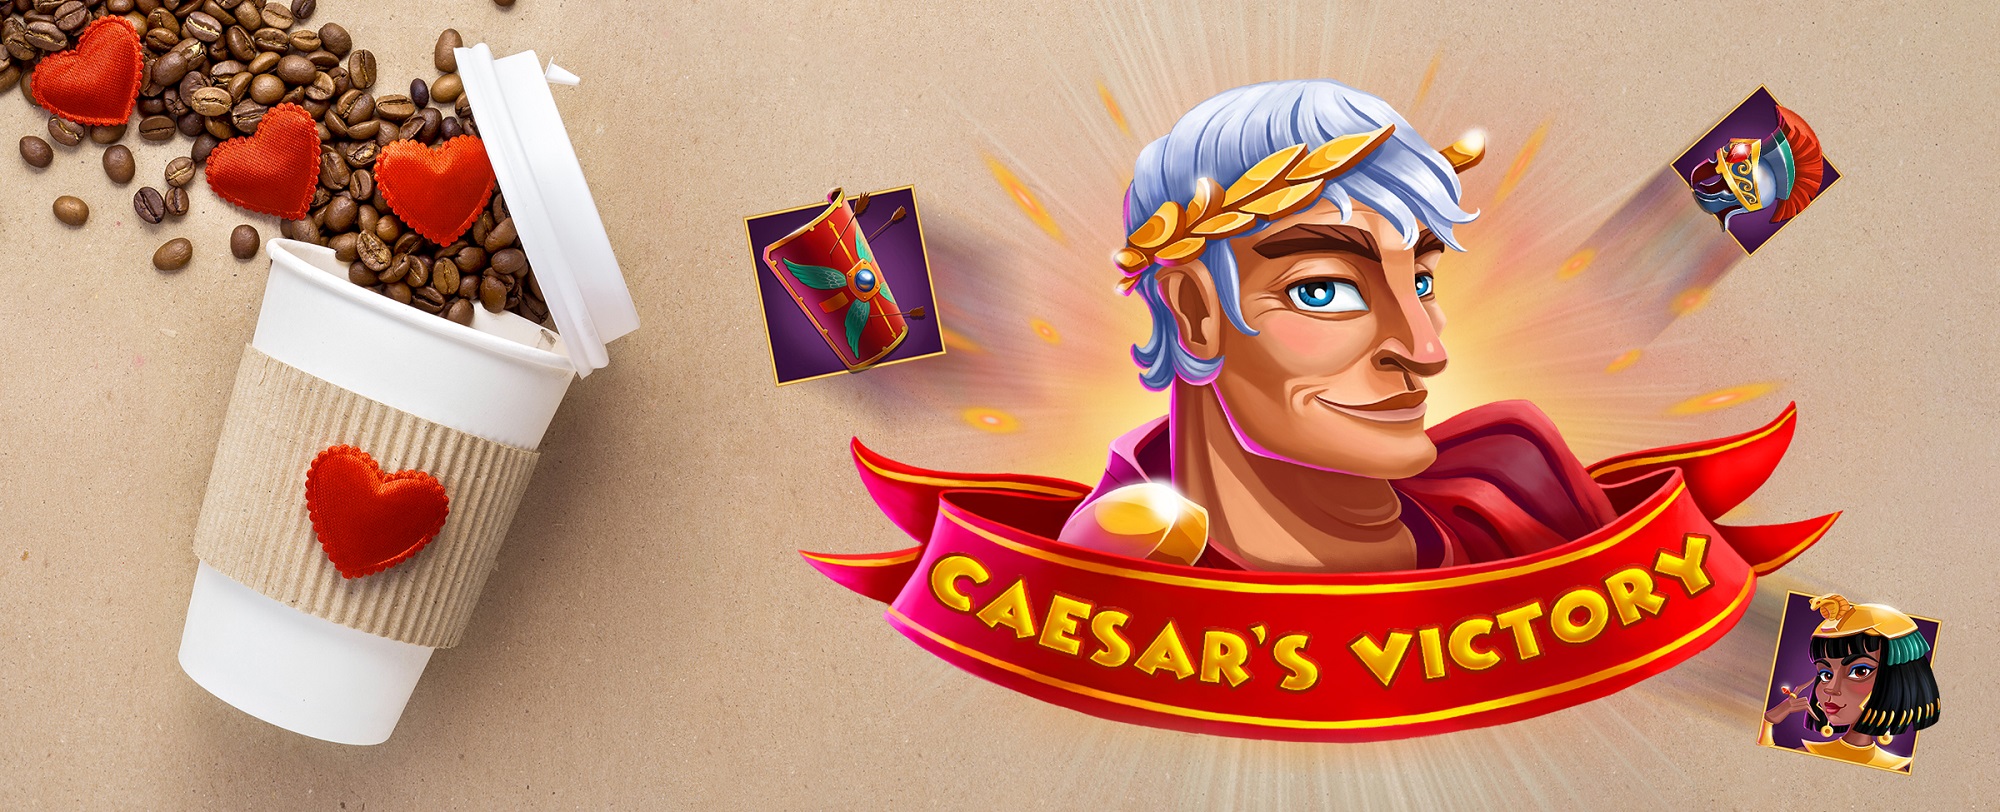 On top of a beige bench surface, we see a white reusable coffee cup with its lid open and coffee beans spilling out, accompanied by red-covered heart-shaped chocolates. To the right, the 3D-animated logo from the Cafe Casino slot game “Caesar’s Victory” is shown.